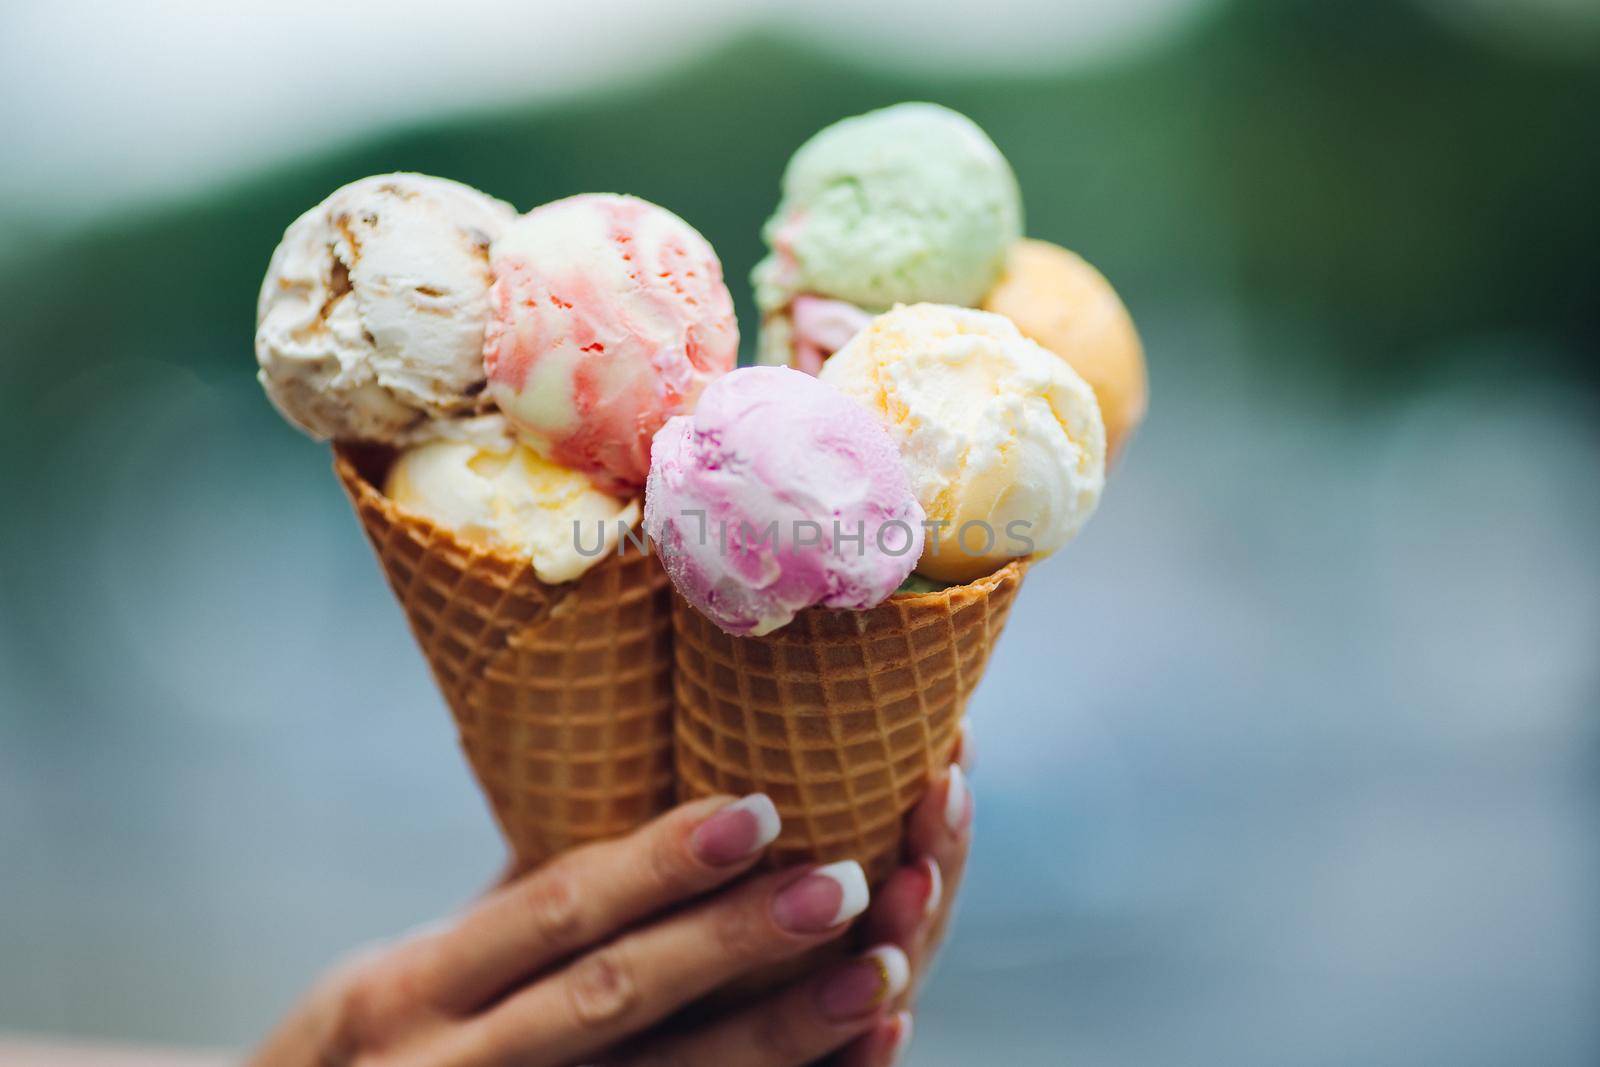 Crop of woman's hand holding delicious colorful ice cream, looking tasty, sweet, mouthwatering, perfect for summer heat while sunny day. Pretty nails with professional french manicure. Food concept.